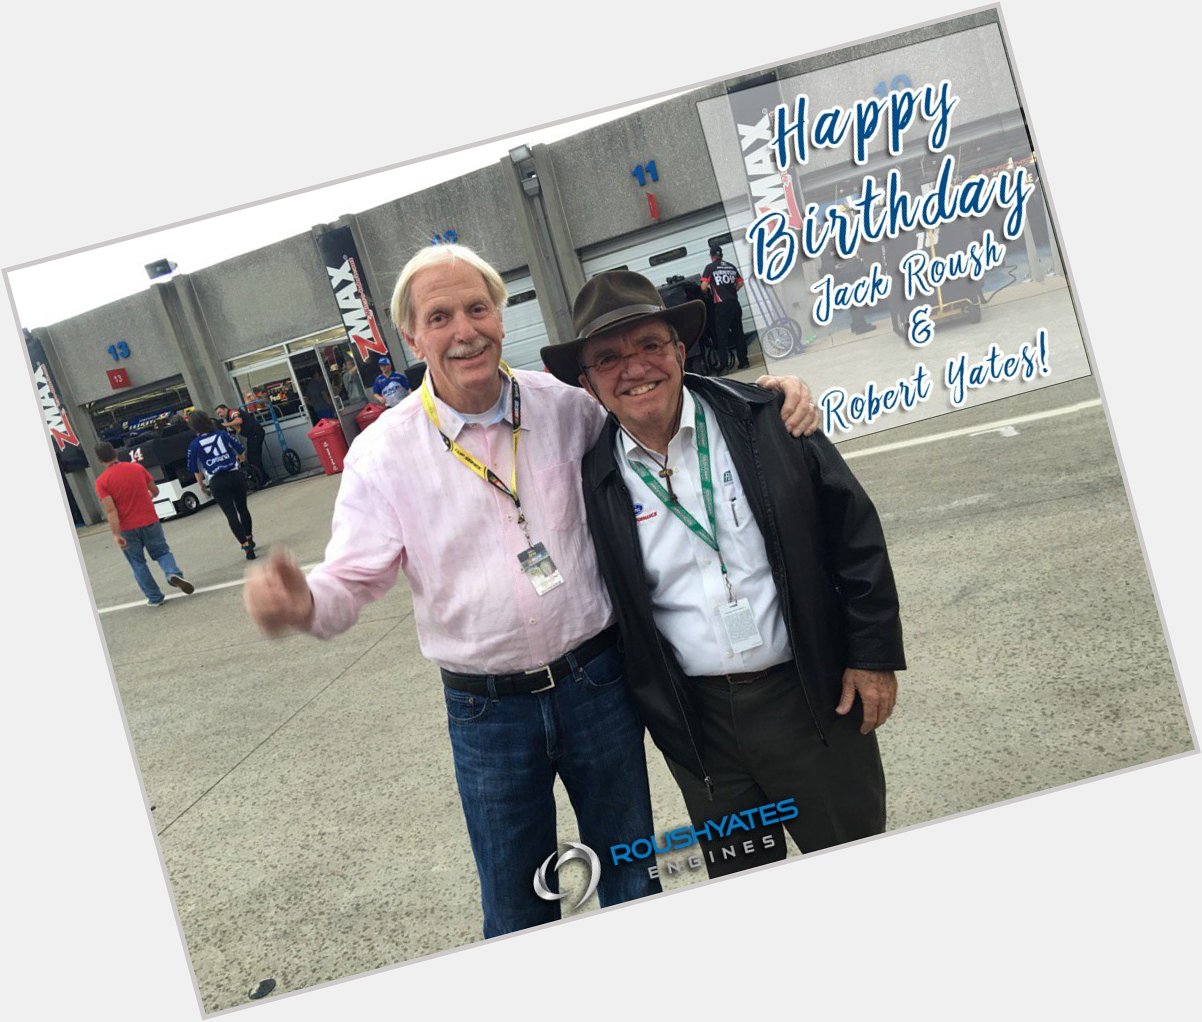 HAPPY BIRTHDAY to our founders Jack Roush & Robert Yates!  